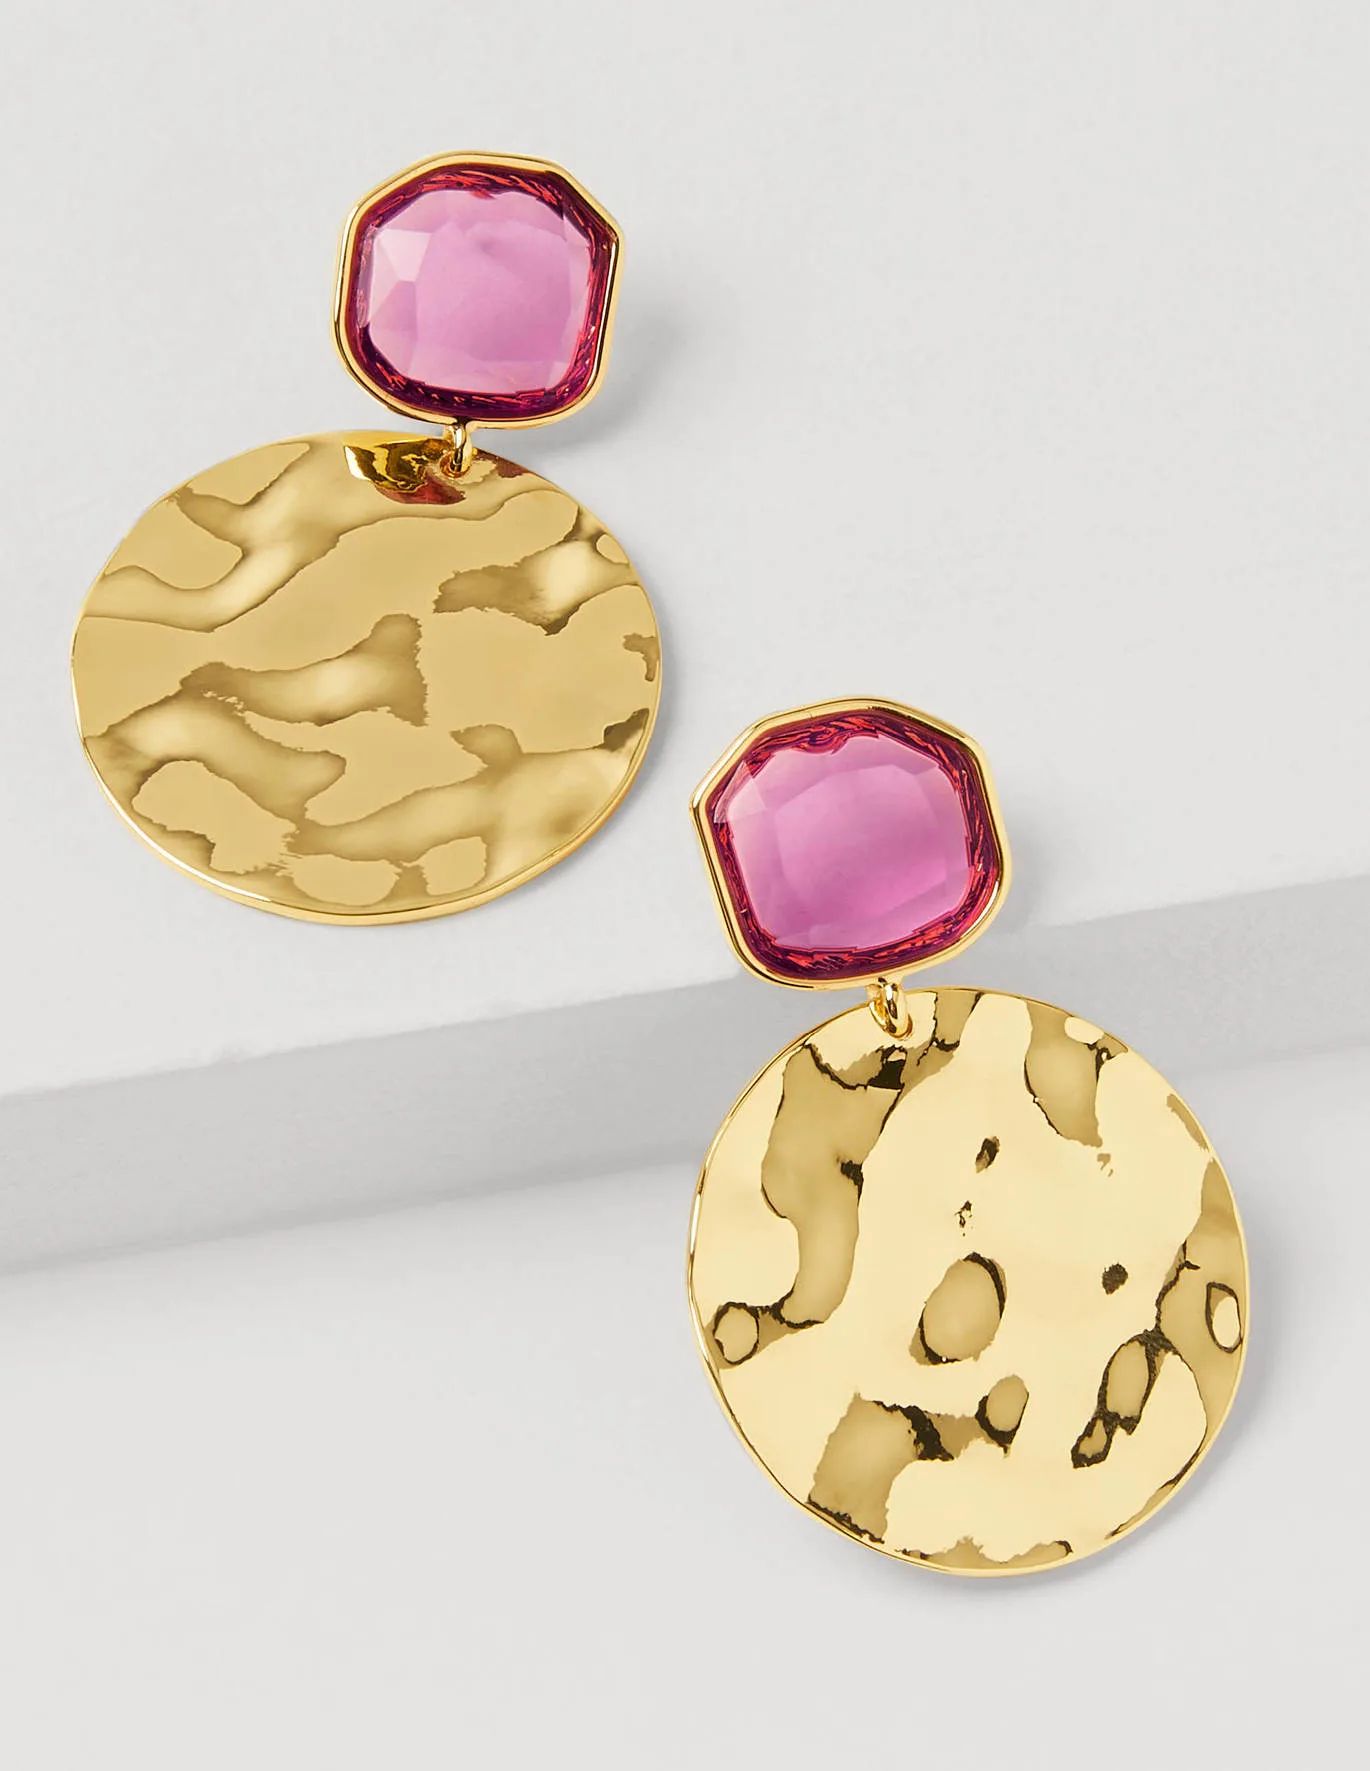 Jewel Hammered Disk Earrings - Formica Pink/Gold Metallic | Boden (US)